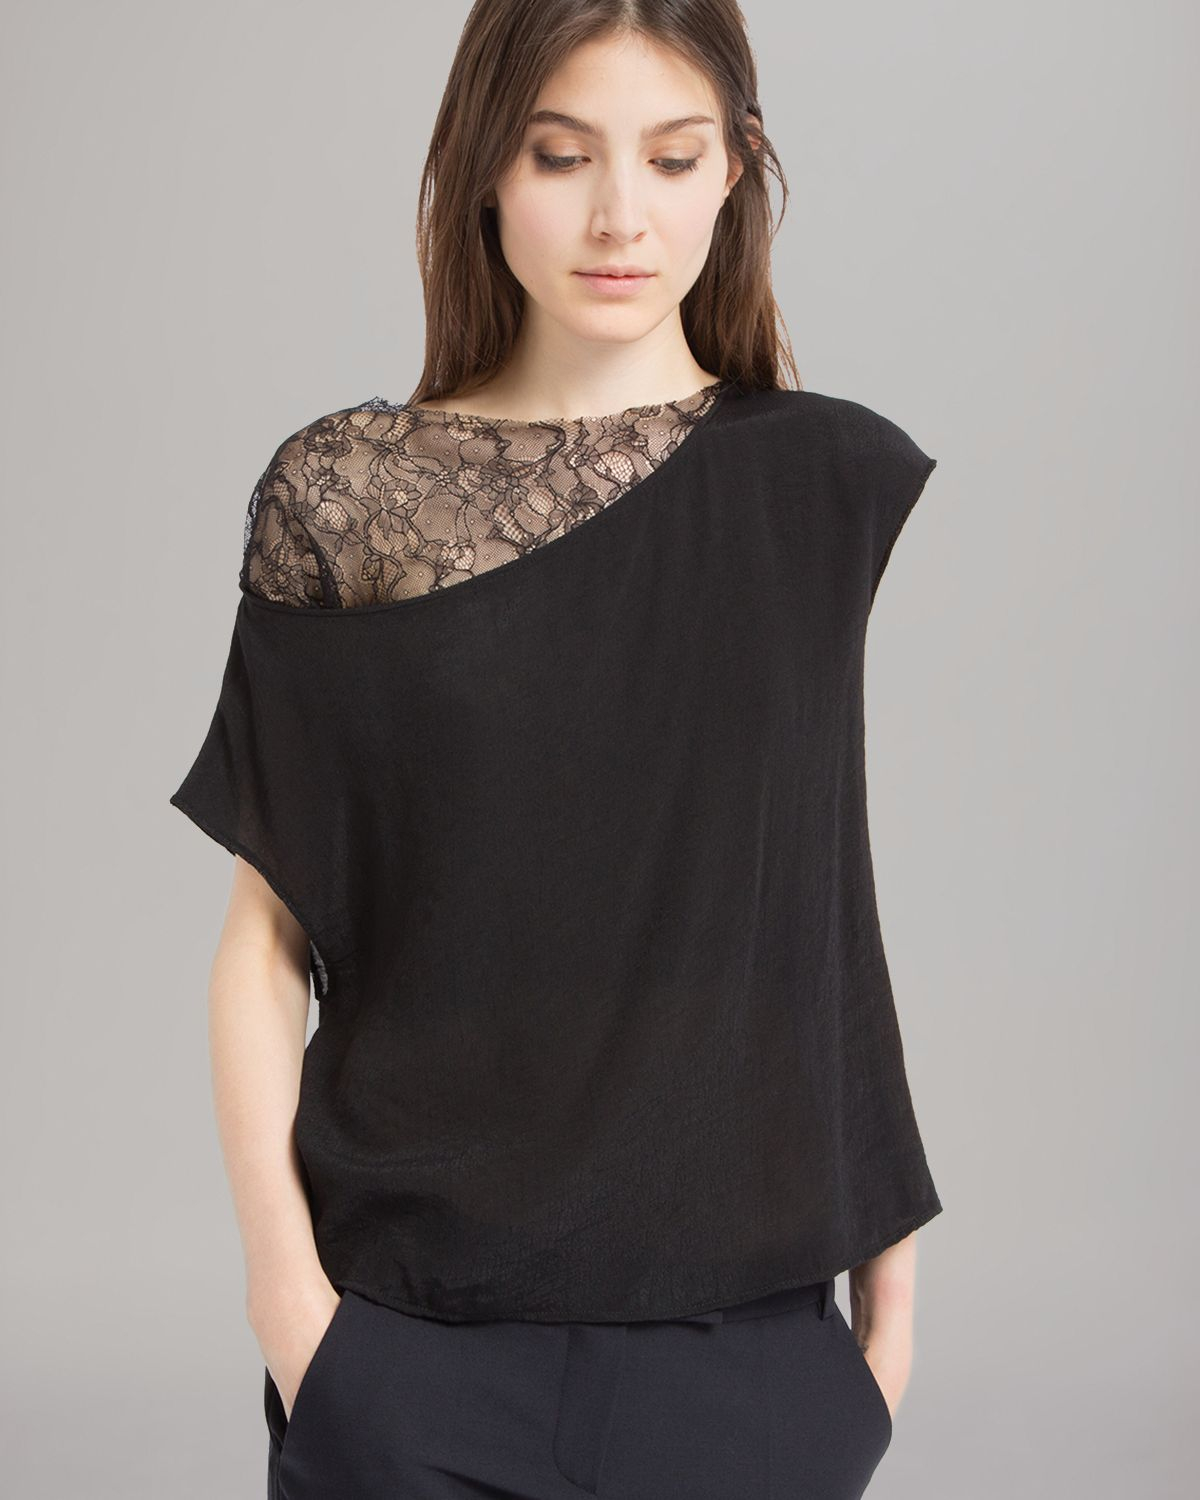 Lyst - Maje Top Enock Lace Panel in Black